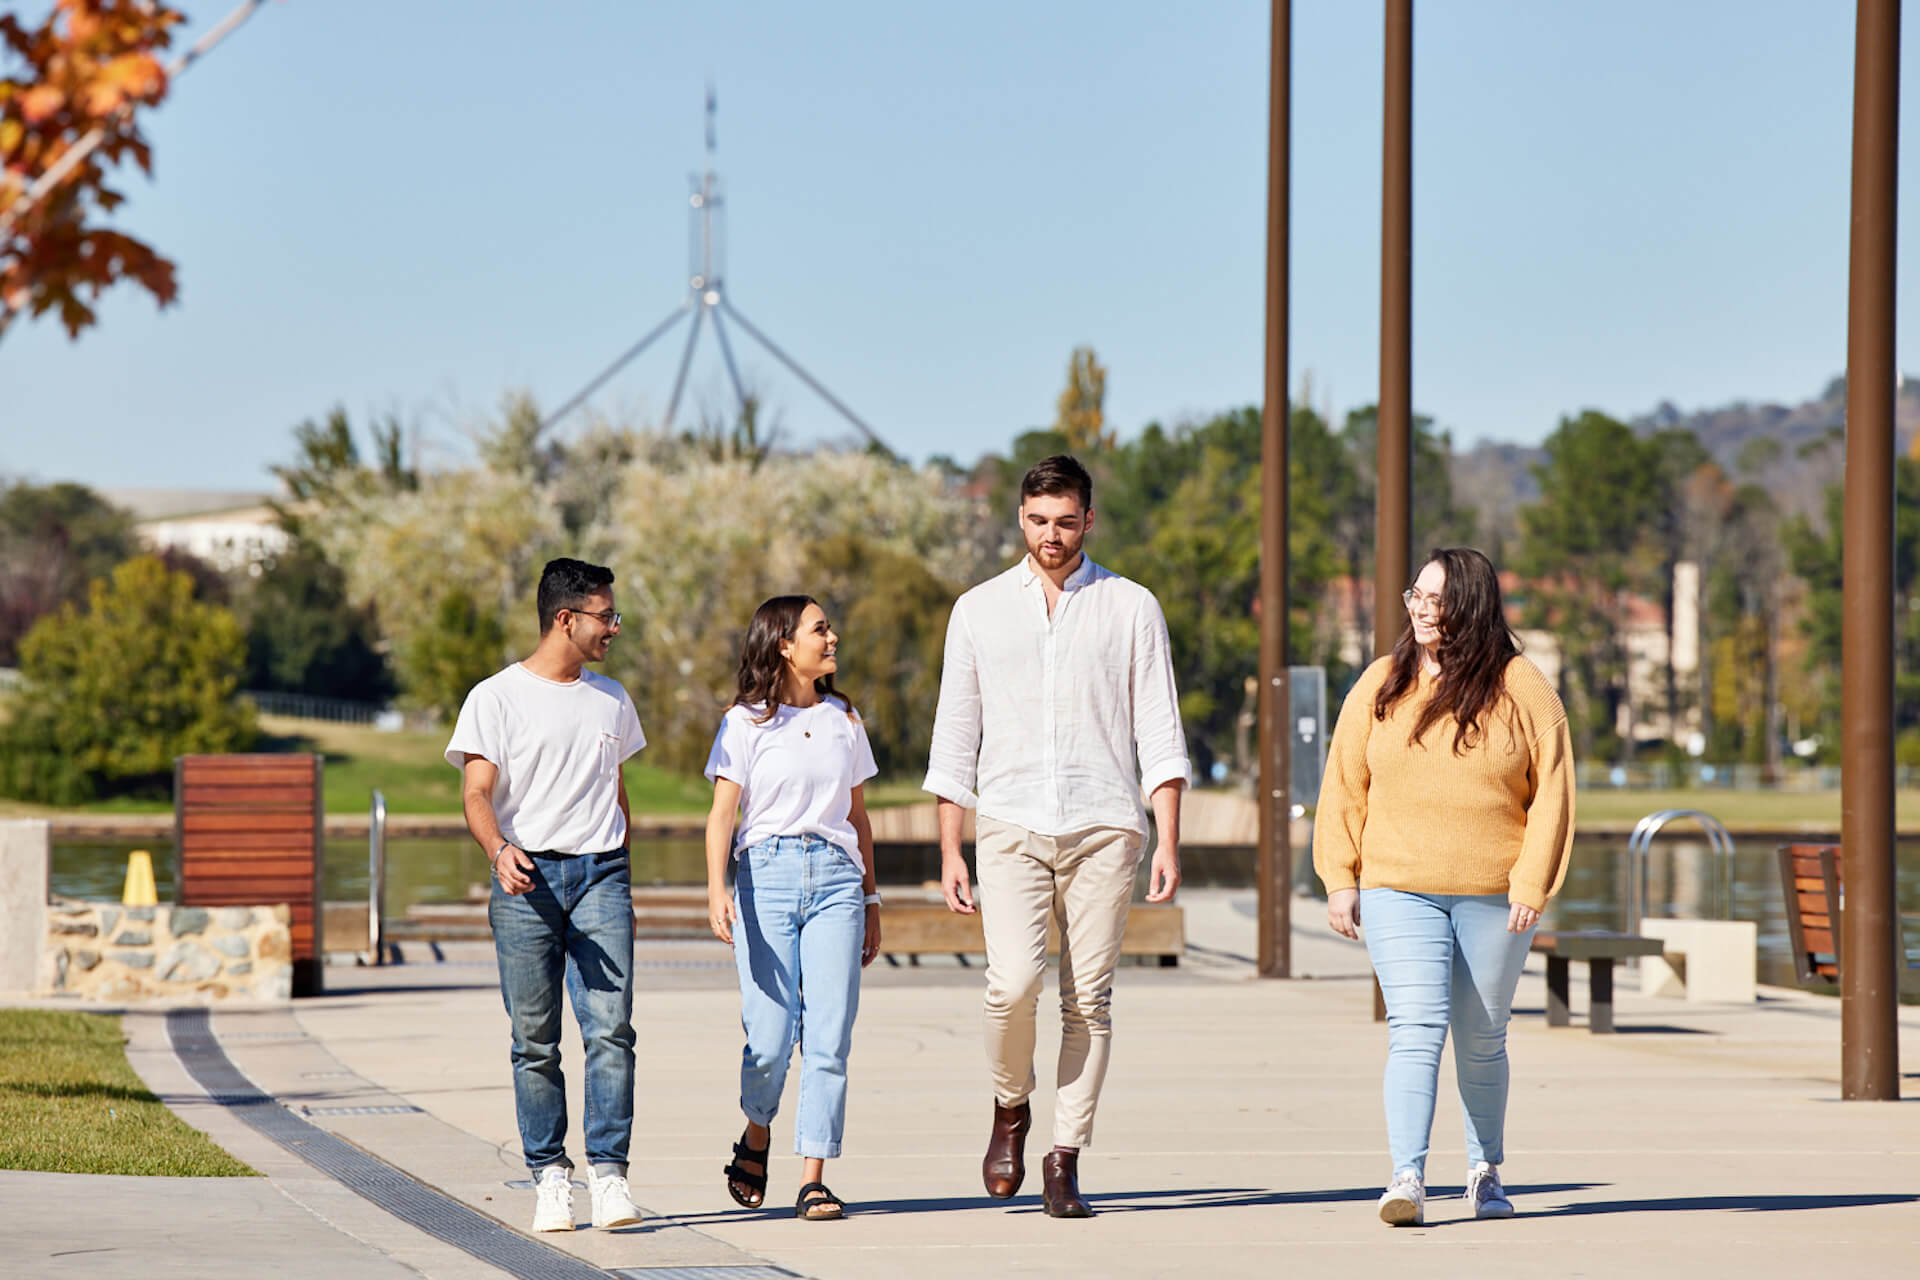 Event and tourism management students walking with the Parliament House in the background